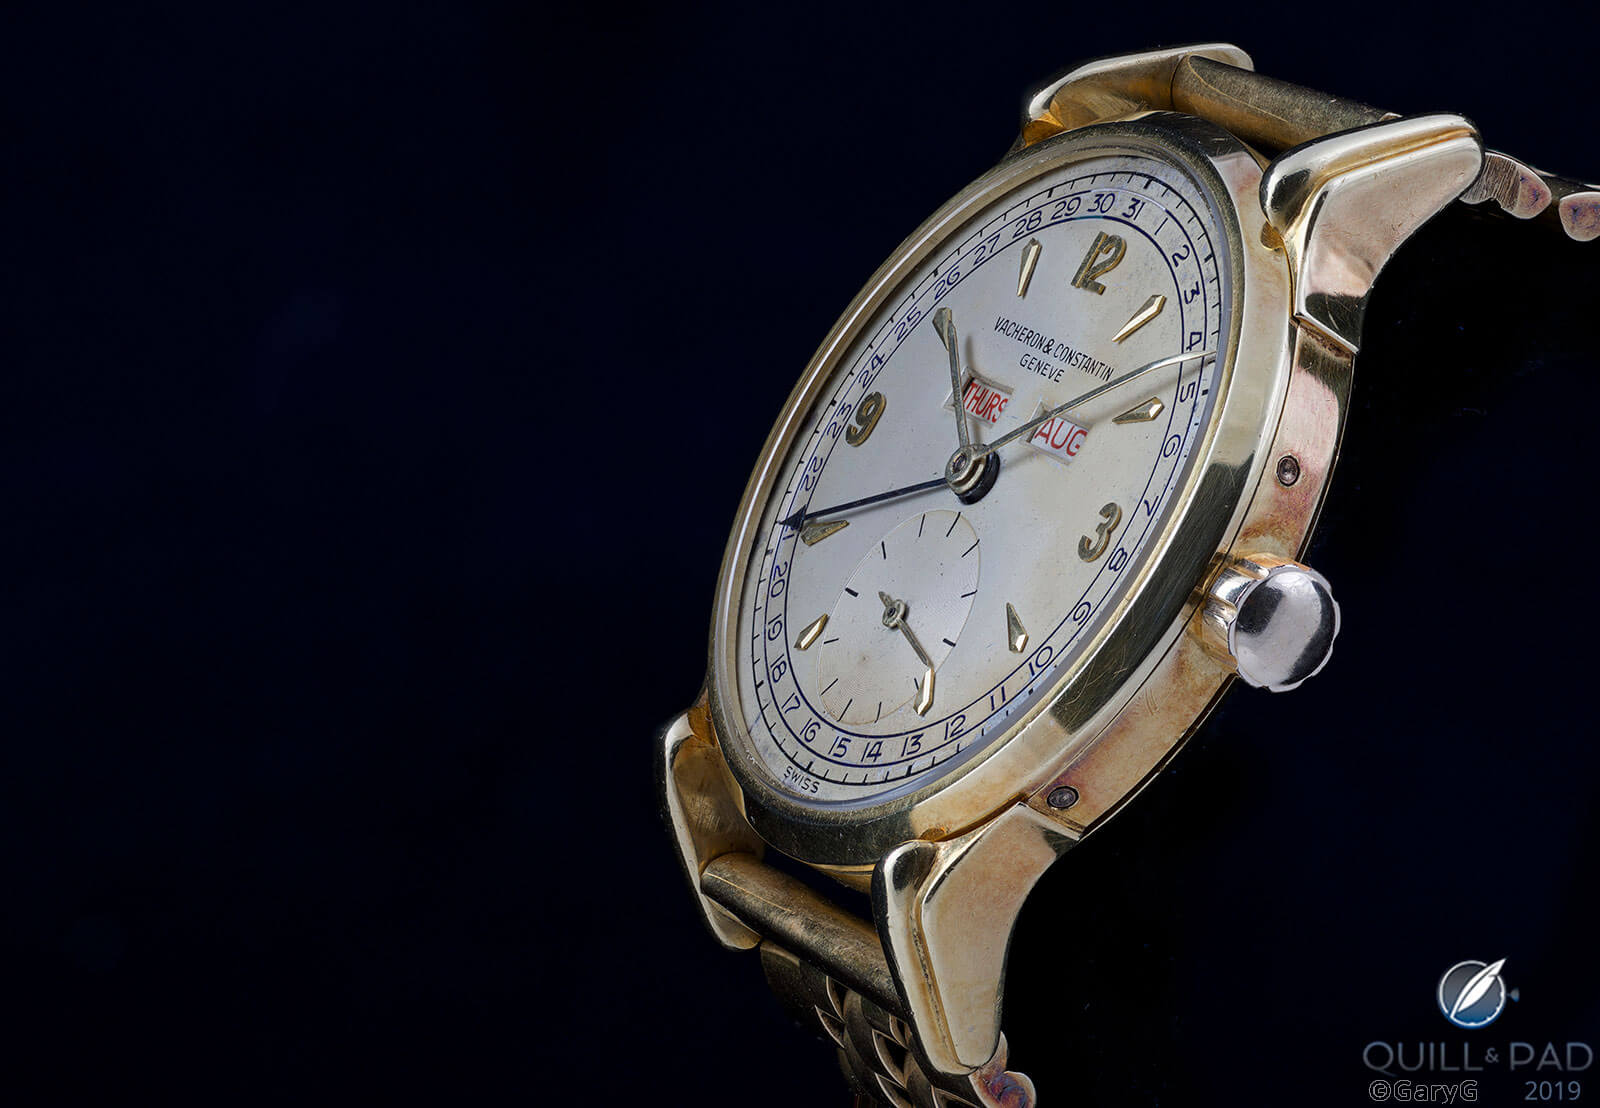 Case profile, Vacheron & Constantin Reference 4560 with replacement crown